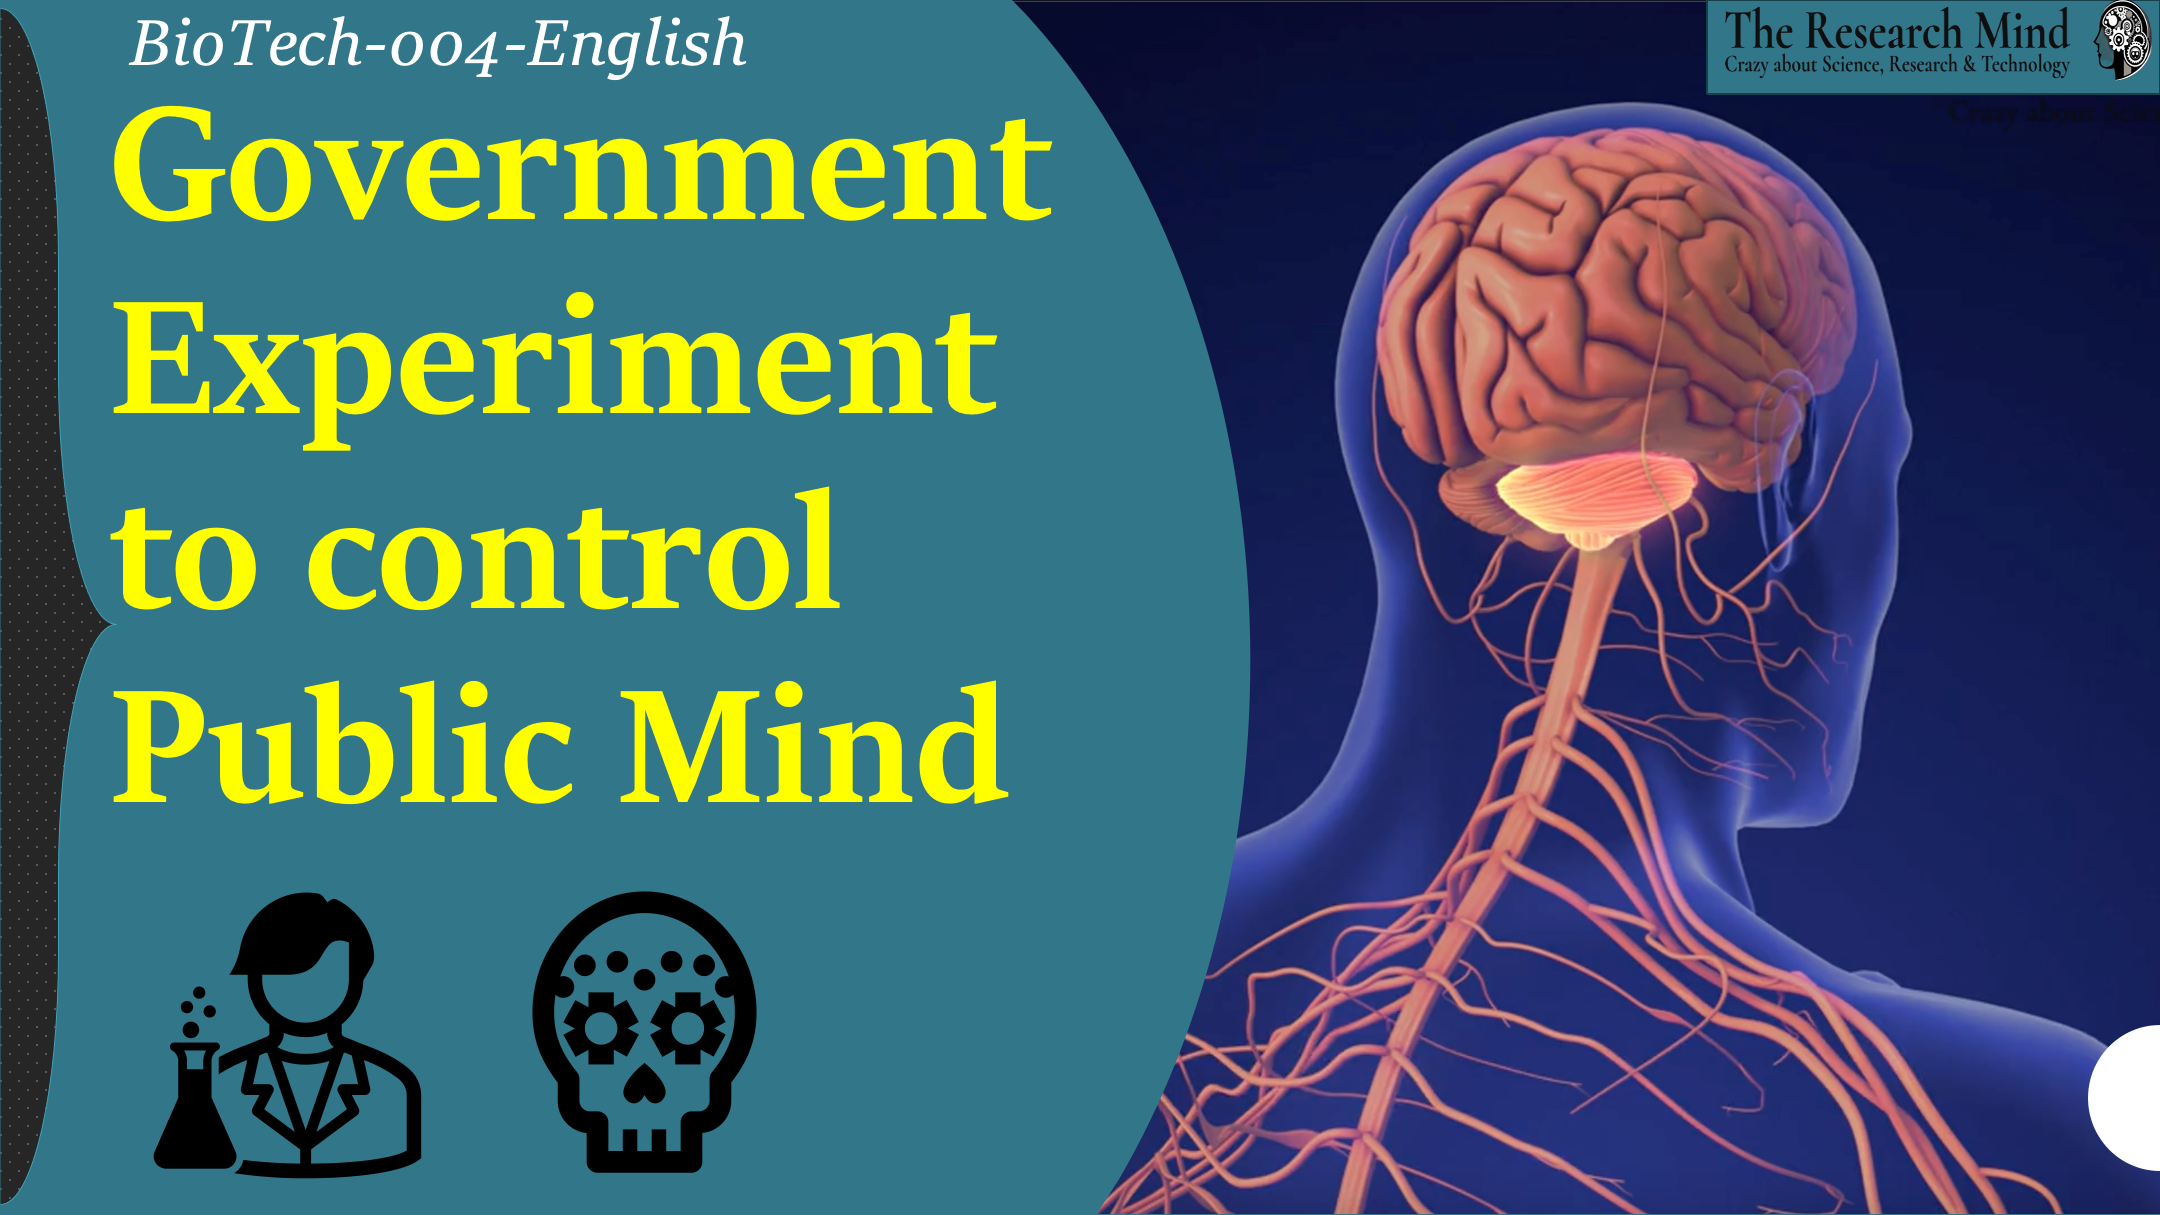 Crazy experiment by the government to control Public Mind